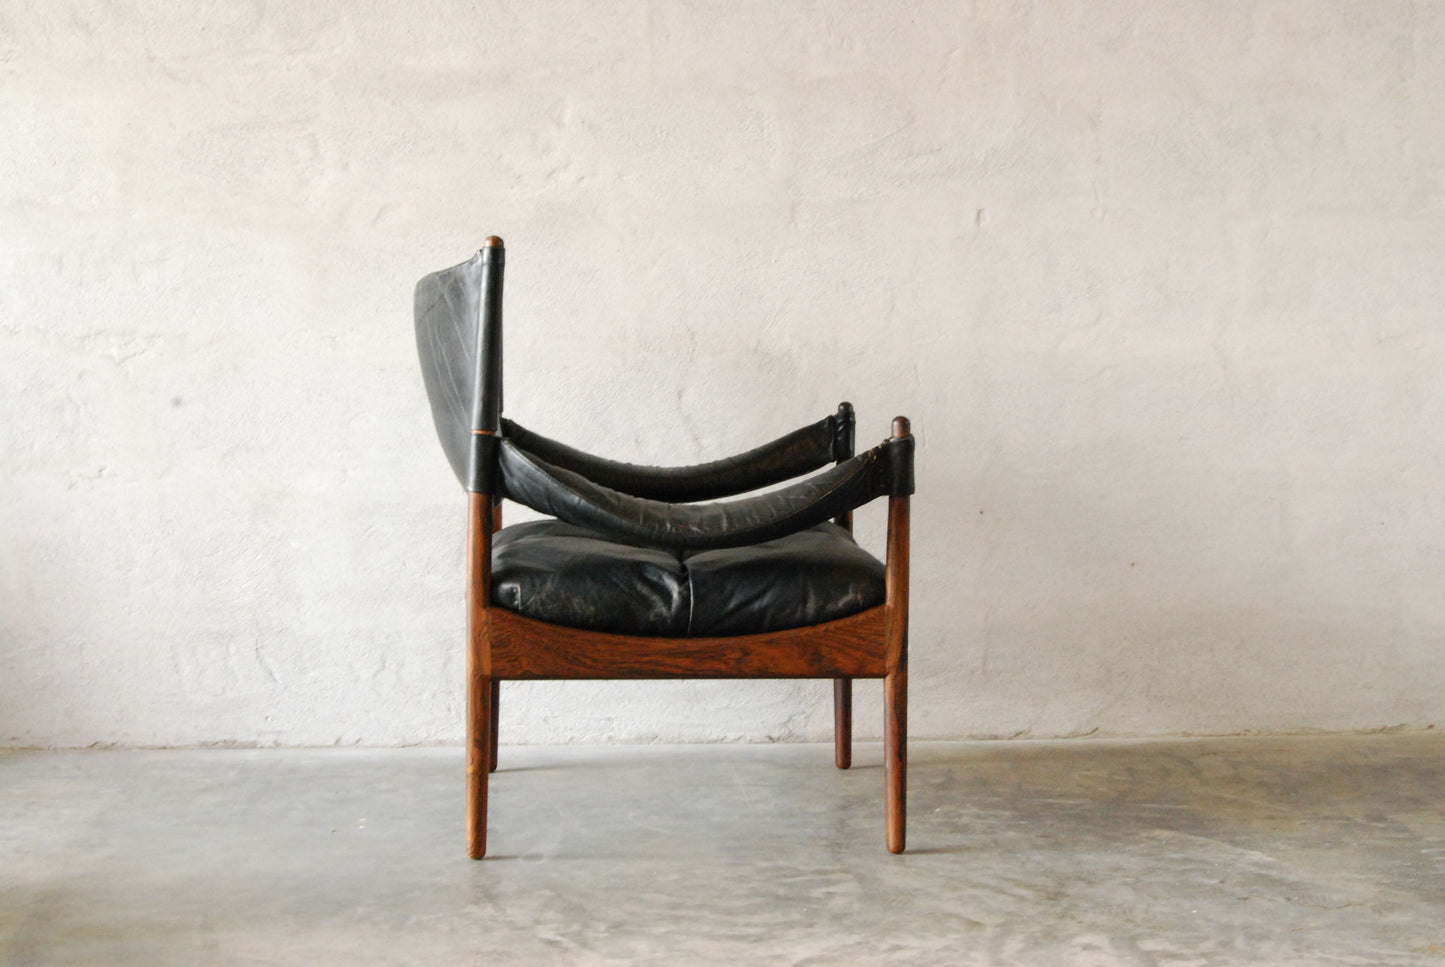 Modus chair and footstool by Kristian Solmer Vedel